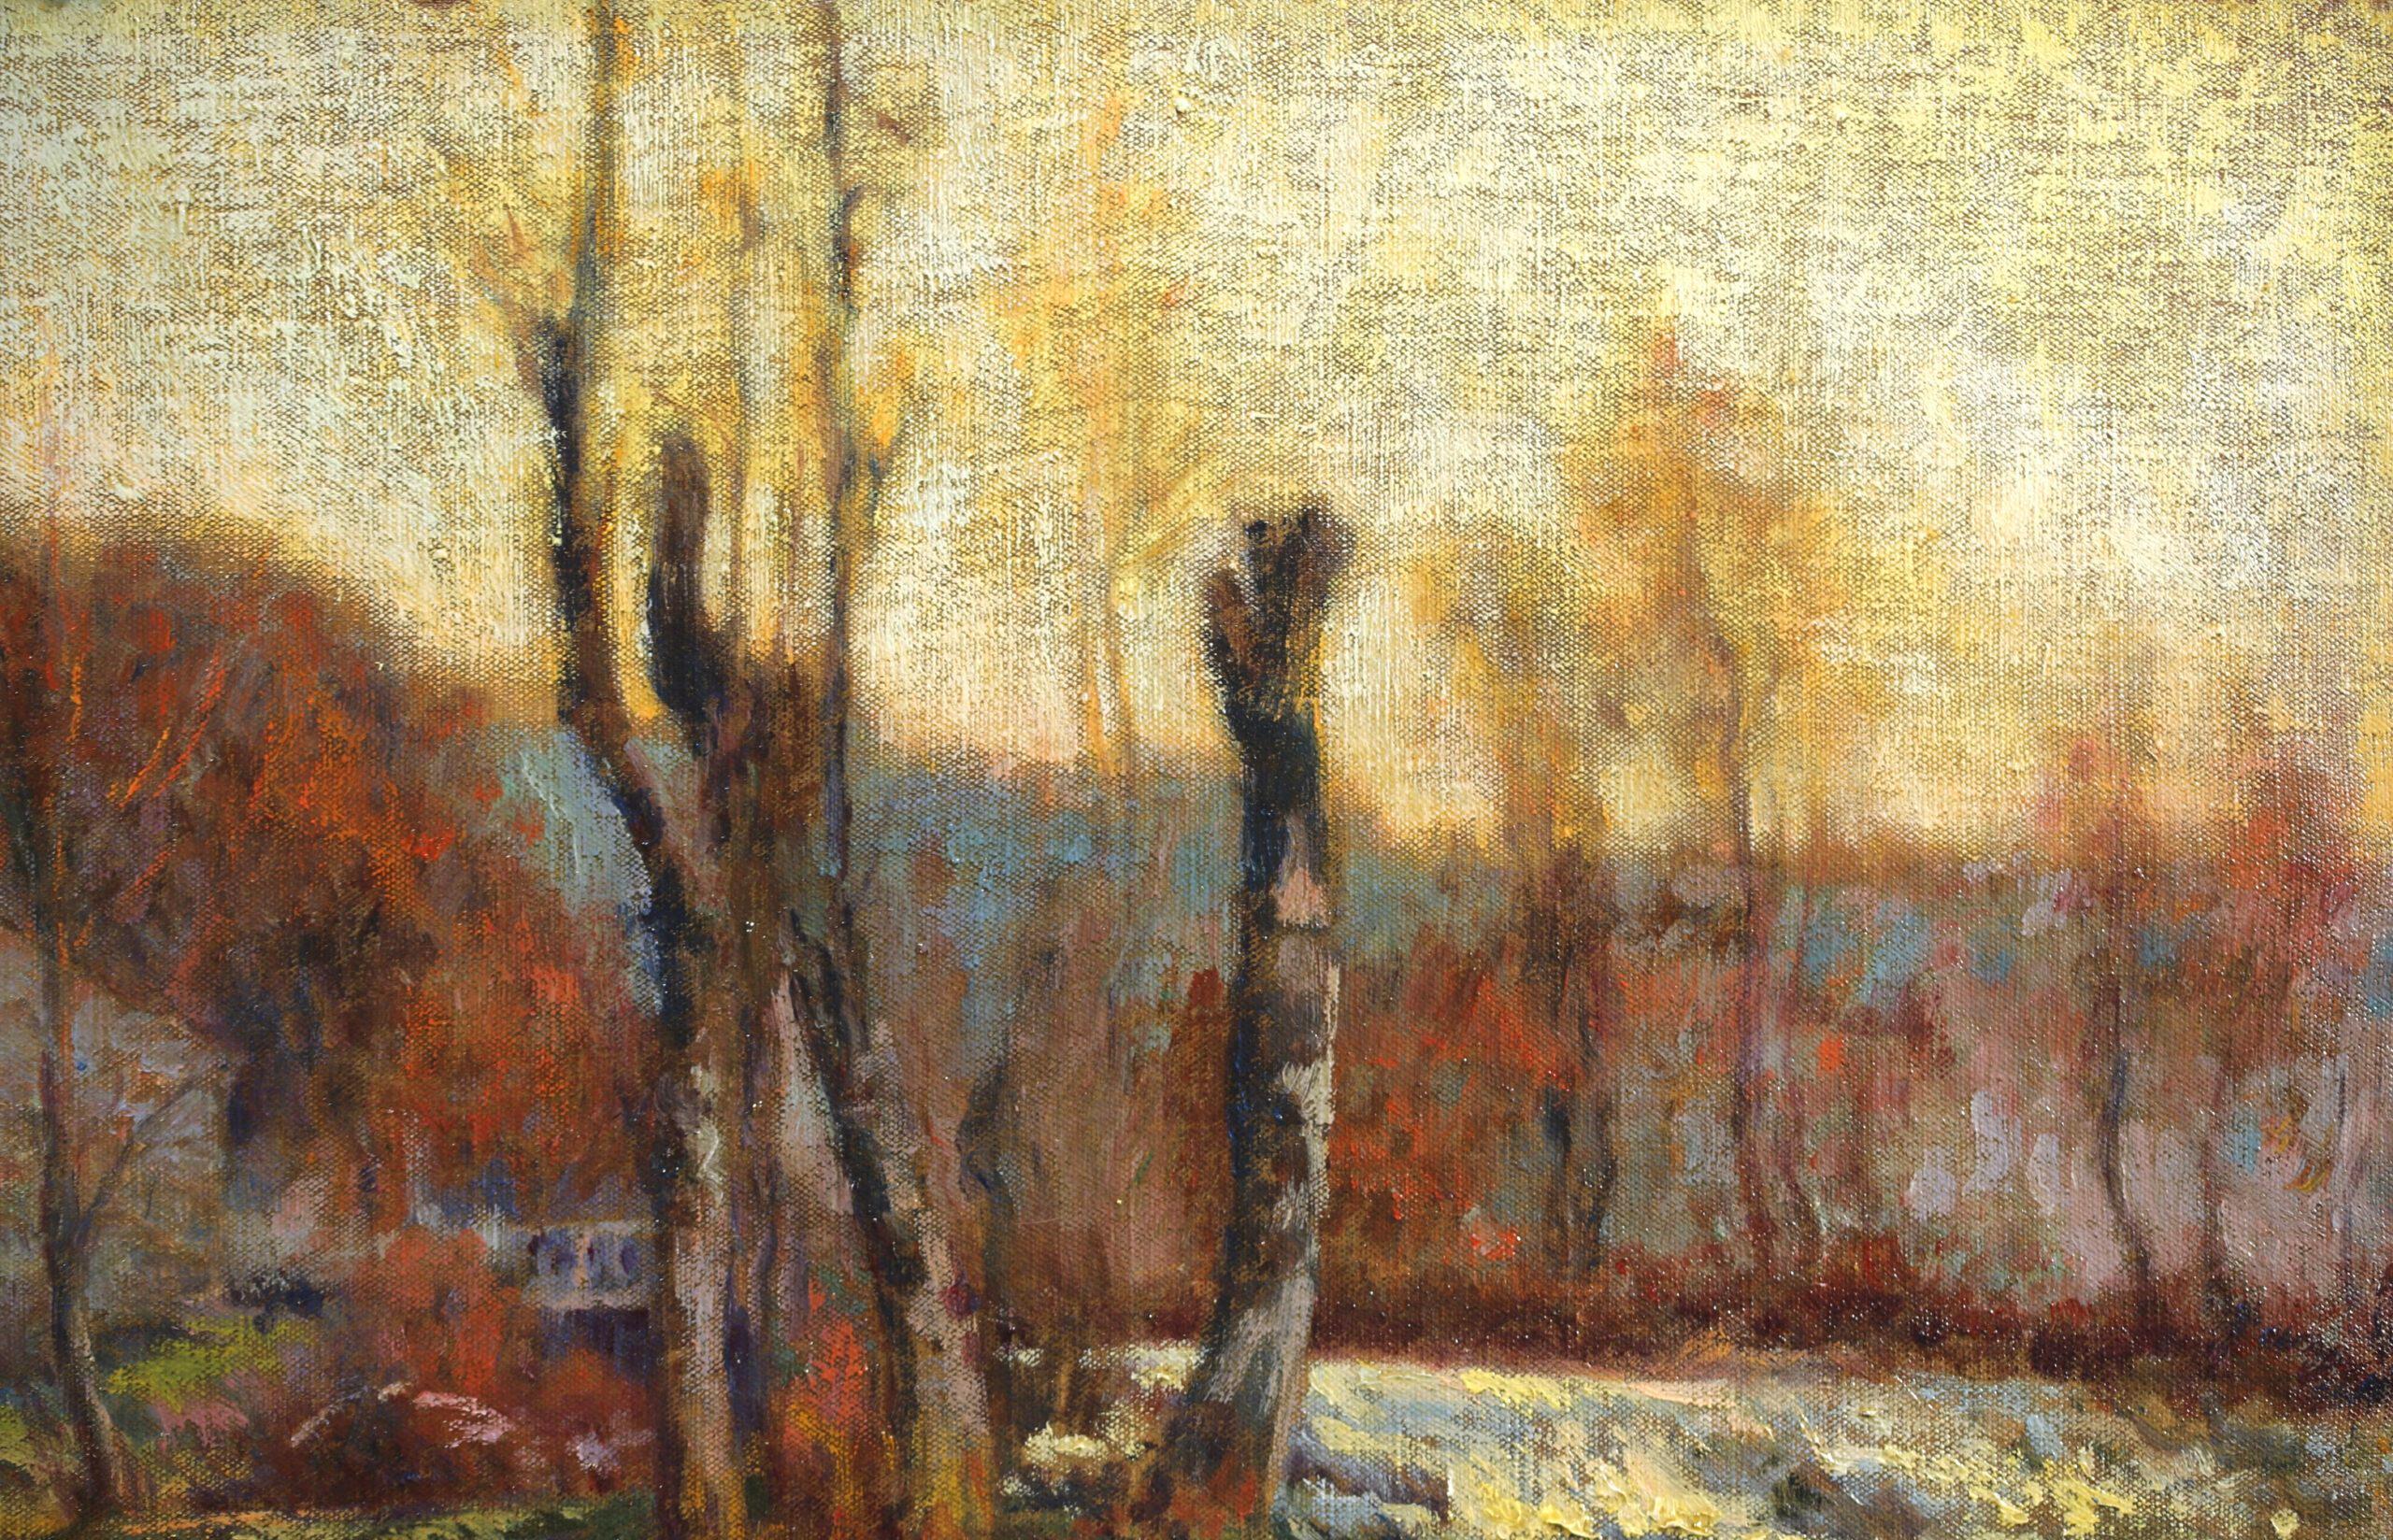 Signed oil on canvas circa 1910 by French post impressionist painter Michel Korochansky. This autumnal landscape depicts a view of women washing linen on the bank of a river. The last light of the setting sun is illuminating the bricks of the